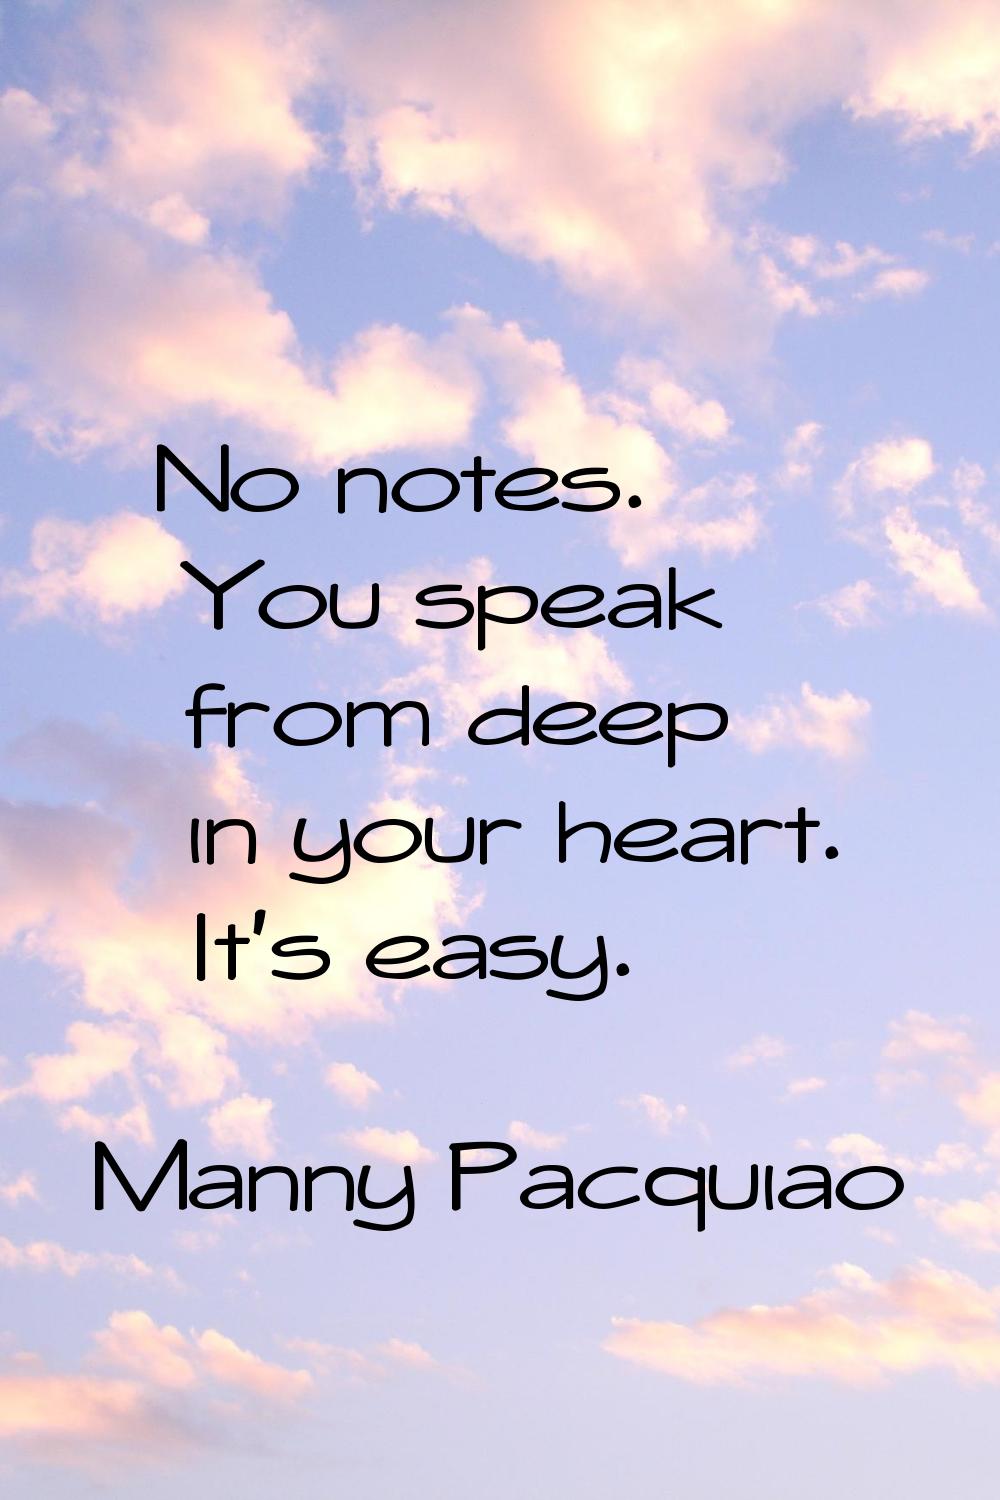 No notes. You speak from deep in your heart. It's easy.